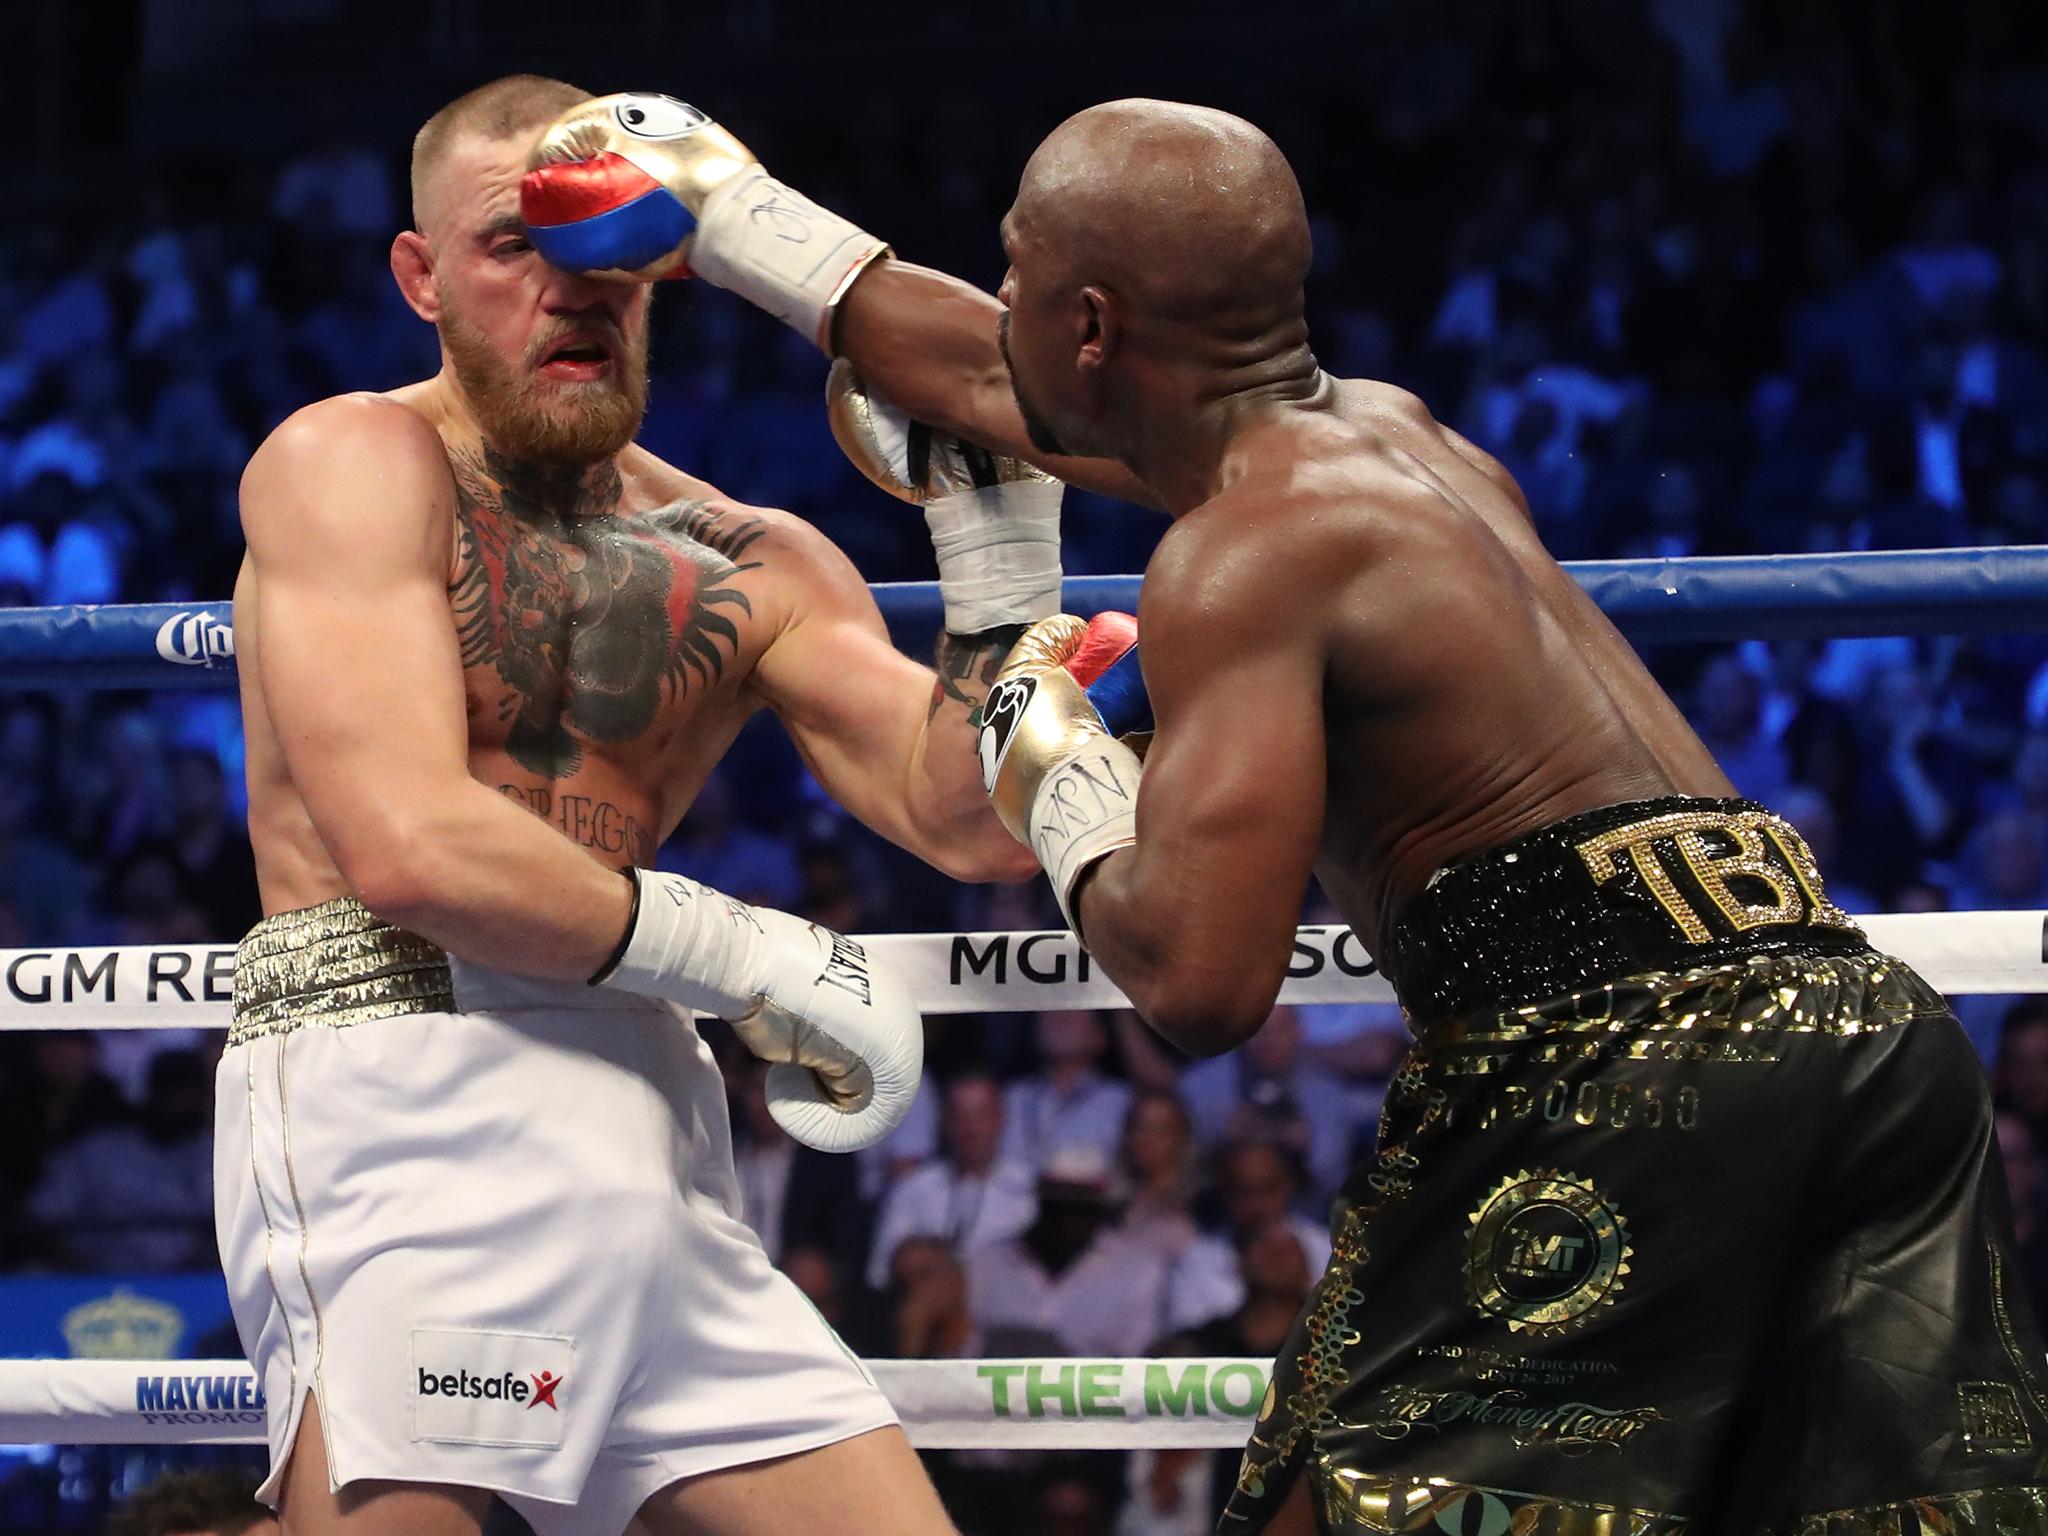 &#13;
Mayweather grew into the fight and utterly outclassed McGregor &#13;